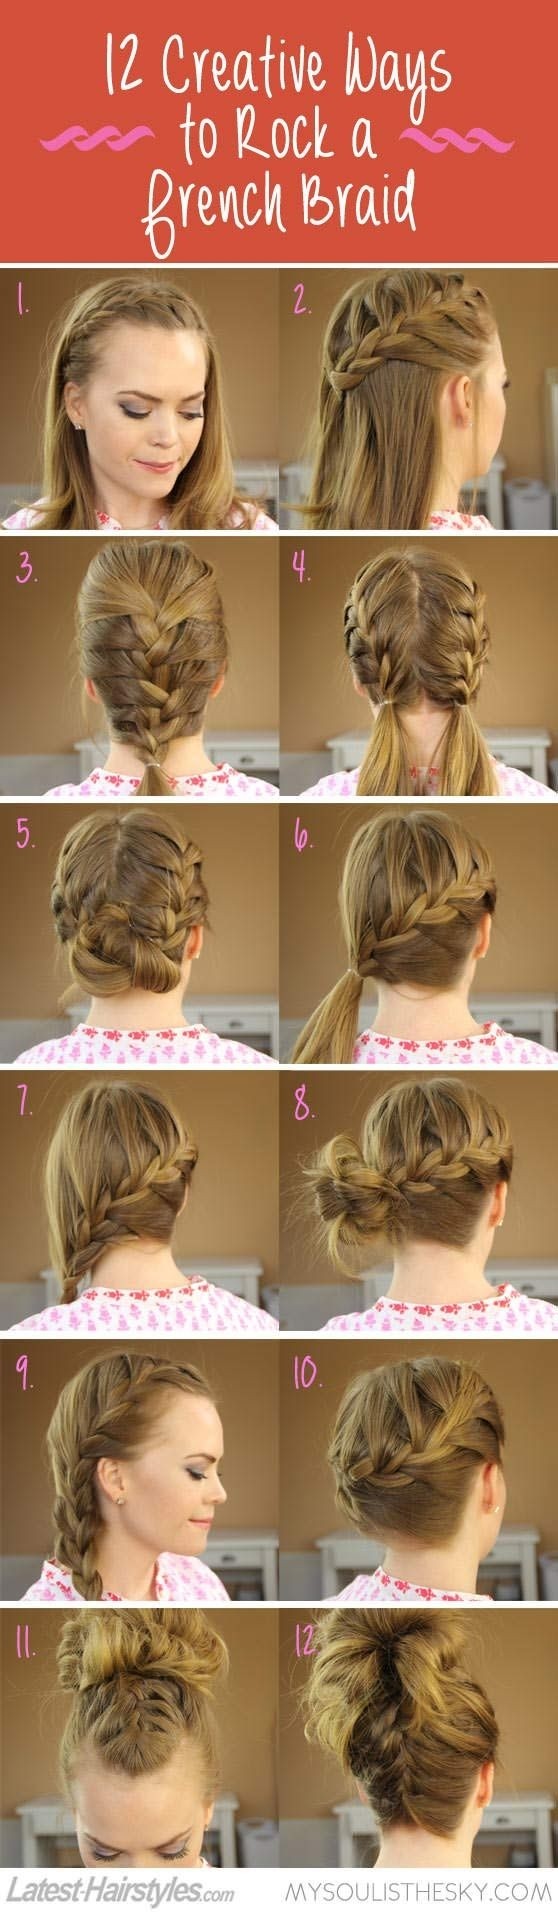 Creative French ideas for braided hairstyles